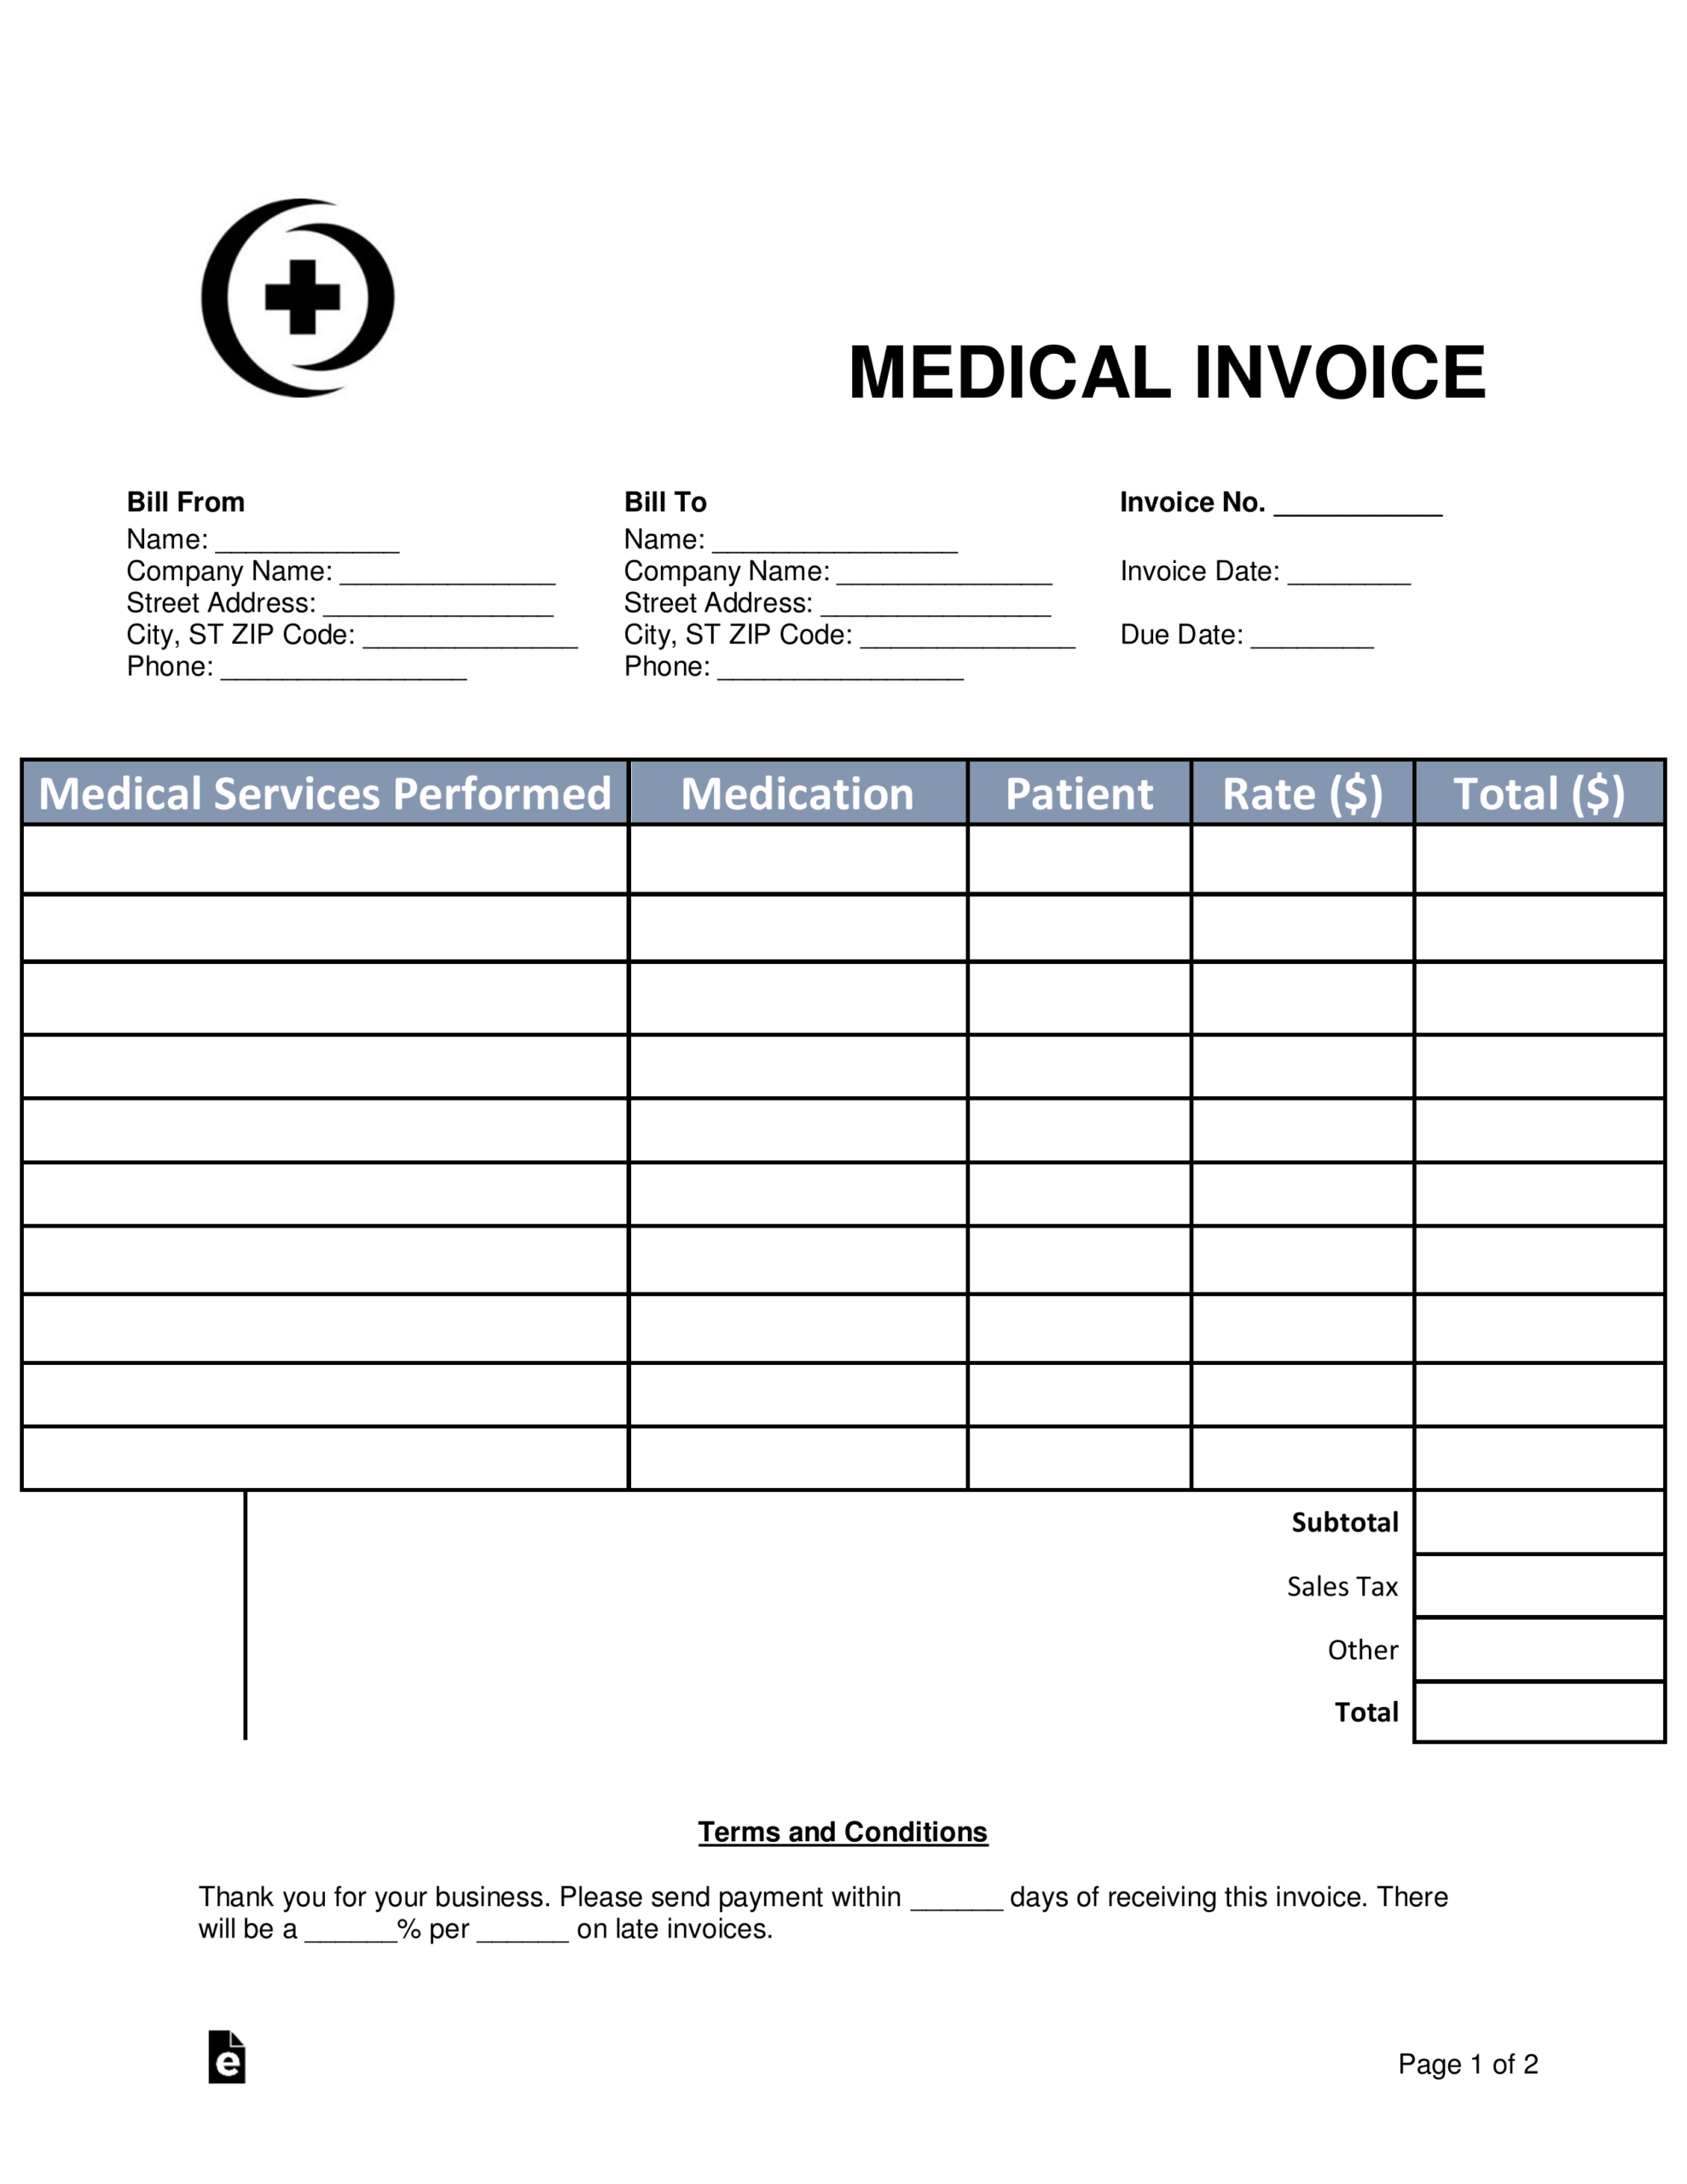 Free Medical Invoice Template - Word | Pdf | Eforms – Free With Regard To Doctors Invoice Template